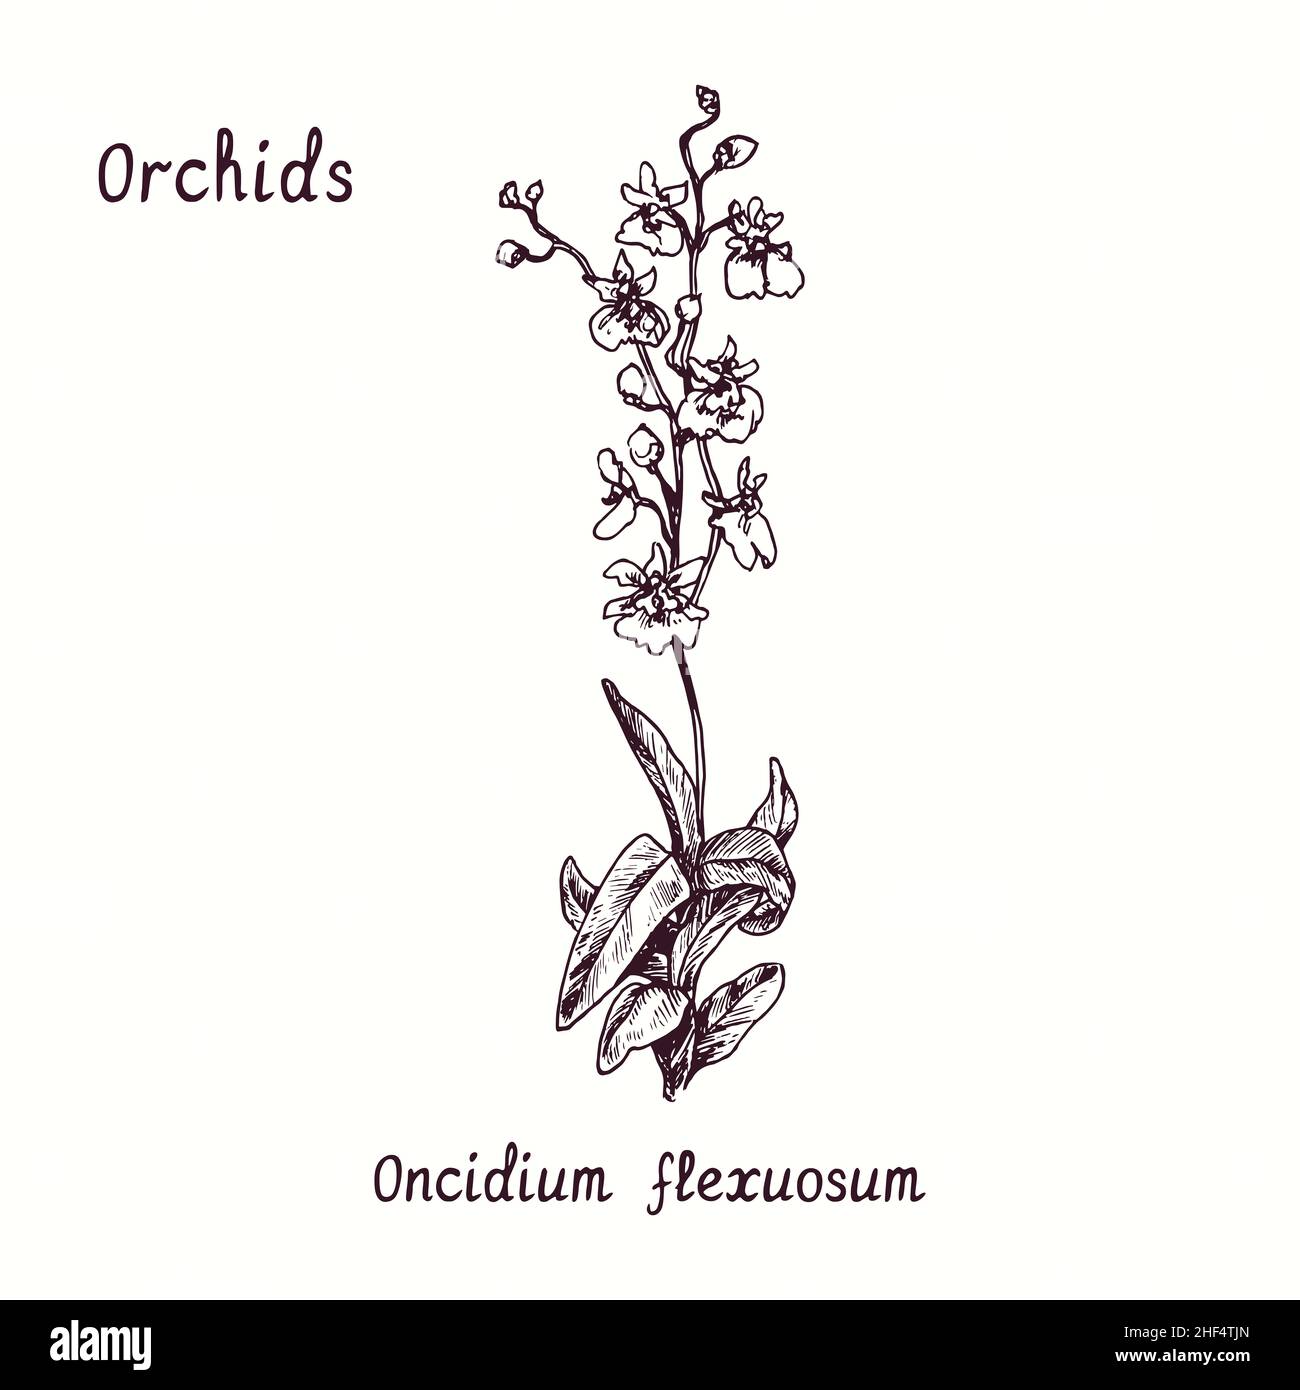 Oncidium flexuosum orchids flower collection. Ink black and white doodle drawing in woodcut style with inscription. Stock Photo